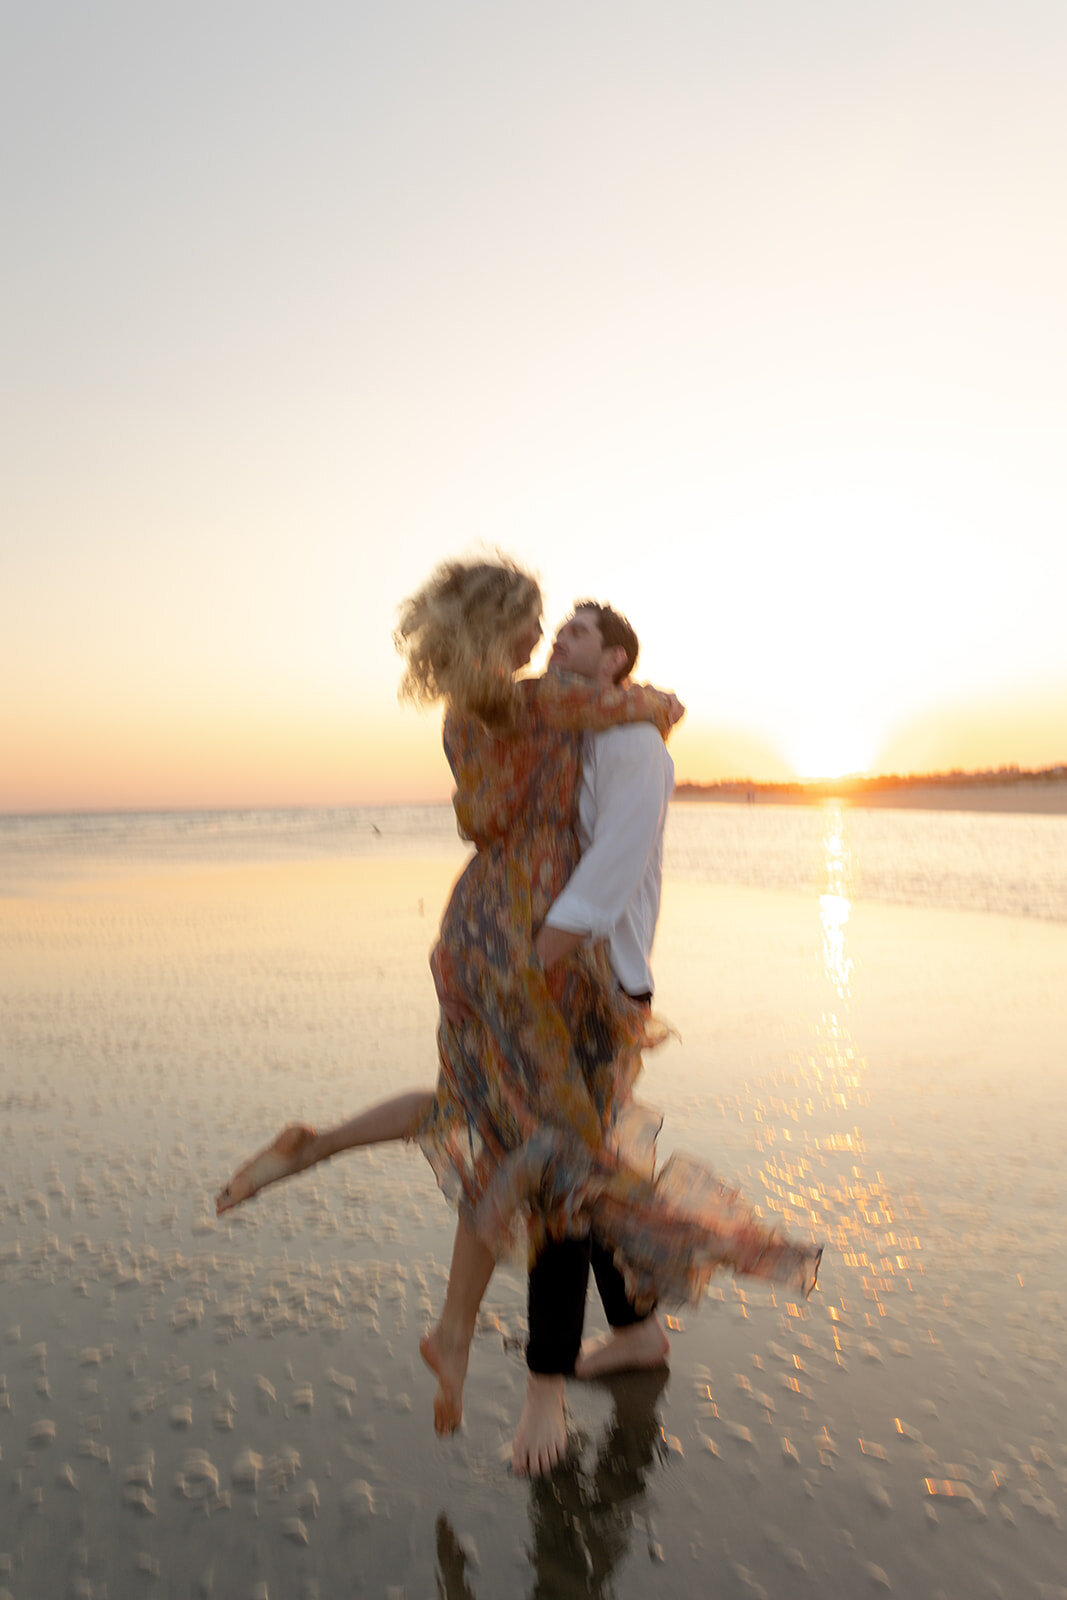 Charleston Beach Engagement Photo of man lifting up woman in colorful dress and twirls. Sun is setting at the horizon and reflecting on shallow water.